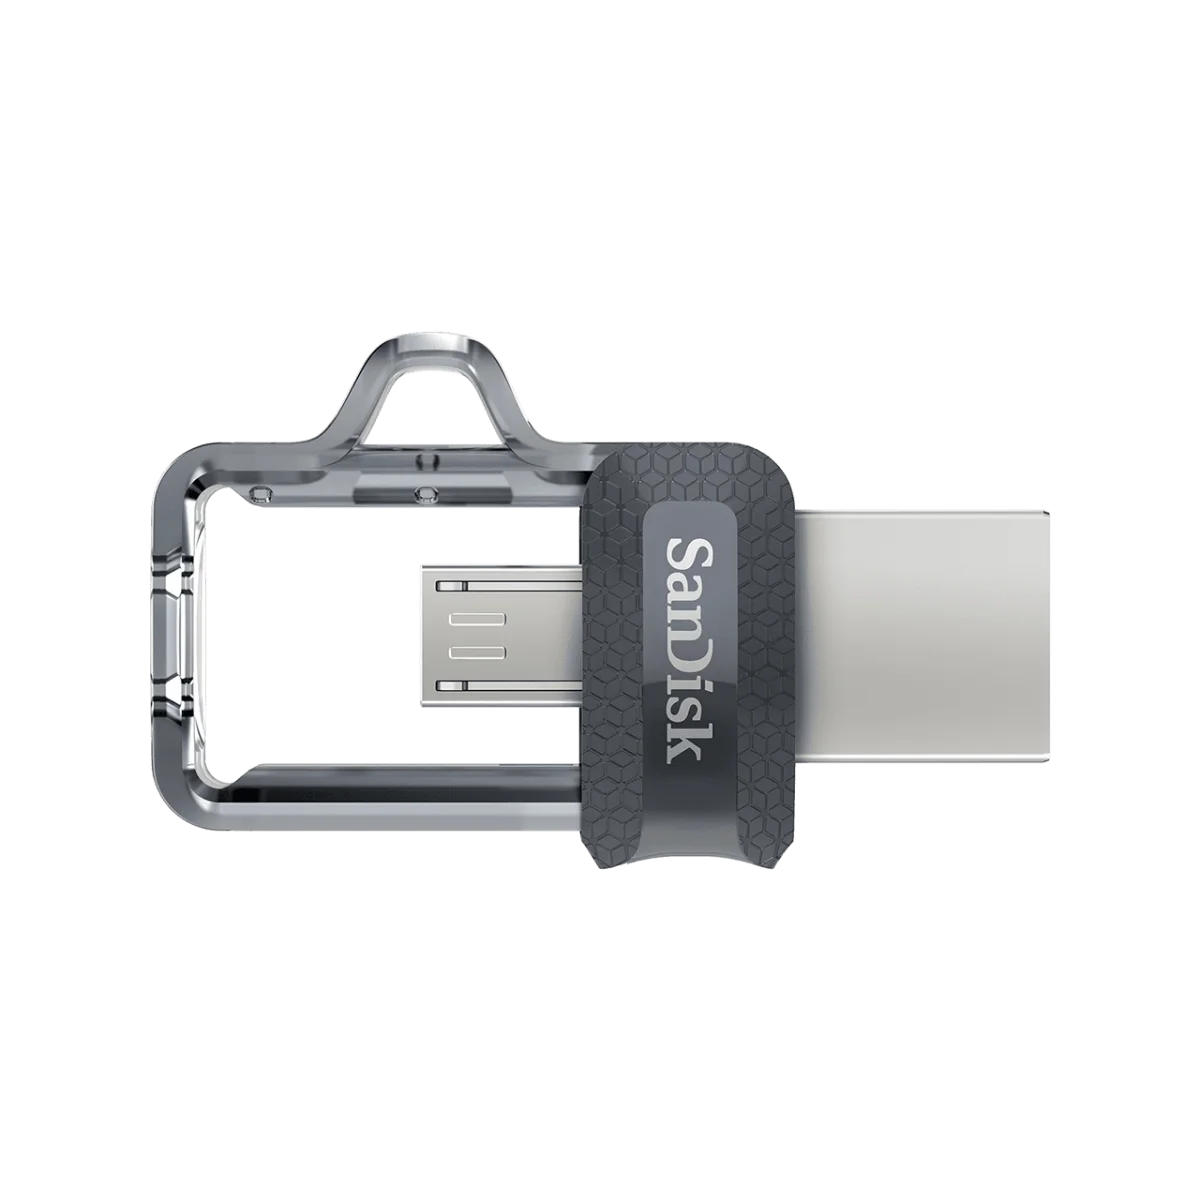 Ultra Dual Drive Usb M 3 Open Top.png.thumb .1280.1280 Sandisk &Lt;Div Class=&Quot;Active&Quot; Data-Sku=&Quot;Sddd3-016G-A46&Quot;&Gt; &Lt;H1&Gt;Instantly Free Up Space On Your Android Smartphone&Lt;/H1&Gt; &Lt;Div Class=&Quot;Inheritpara Mb-4&Quot;&Gt; The Sandisk Ultra® Dual Drive M3.0 Makes It Easy To Transfer Content From Your Phone To Your Computer. With A Micro-Usb Connector On One End And A Usb 3.0 Connector On The Other, The Drive Lets You Move Content Easily Between Your Devices—From Your Android™ Smartphone Or Tablet To Your Laptop, Pc Or Mac Computer&Lt;A Class=&Quot;Disclosure&Quot; Href=&Quot;Https://Shop.westerndigital.com/Products/Usb-Flash-Drives/Sandisk-Ultra-Dual-Drive-M30-Usb-3-0-Micro-Usb#Disclosures&Quot; Target=&Quot;_Self&Quot; Rel=&Quot;Noopener Noreferrer&Quot; Aria-Labelledby=&Quot;Disclosures&Quot;&Gt;&Lt;Sup&Gt;1&Lt;/Sup&Gt;&Lt;/A&Gt;. The Usb 3.0 Connector Is High-Performance And Backward-Compatible With Usb 2.0 Ports. The Sandisk® Memory Zone App&Lt;A Class=&Quot;Disclosure&Quot; Href=&Quot;Https://Shop.westerndigital.com/Products/Usb-Flash-Drives/Sandisk-Ultra-Dual-Drive-M30-Usb-3-0-Micro-Usb#Disclosures&Quot; Target=&Quot;_Self&Quot; Rel=&Quot;Noopener Noreferrer&Quot; Aria-Labelledby=&Quot;Disclosures&Quot;&Gt;&Lt;Sup&Gt;2&Lt;/Sup&Gt;&Lt;/A&Gt; For Android (Available On Google Play) Helps You Manage Your Device’s Memory And Your Content. &Lt;Strong&Gt;Warranty&Lt;/Strong&Gt; The Sandisk Ultra Flair Usb 3.0 Flash Drive Is Backed By A Five-Year Manufacturer Warranty&Lt;A Class=&Quot;Disclosure&Quot; Href=&Quot;Https://Shop.westerndigital.com/Products/Usb-Flash-Drives/Sandisk-Ultra-Flair-Usb-3-0#Disclosures&Quot; Target=&Quot;_Self&Quot; Rel=&Quot;Noopener Noreferrer&Quot; Aria-Labelledby=&Quot;Disclosures&Quot;&Gt;&Lt;Sup&Gt;2&Lt;/Sup&Gt;&Lt;/A&Gt; &Lt;/Div&Gt; &Lt;/Div&Gt; Sandisk Ultra Dual Drive M3.0 Flash Drive For Android Smartphones (16Gb)